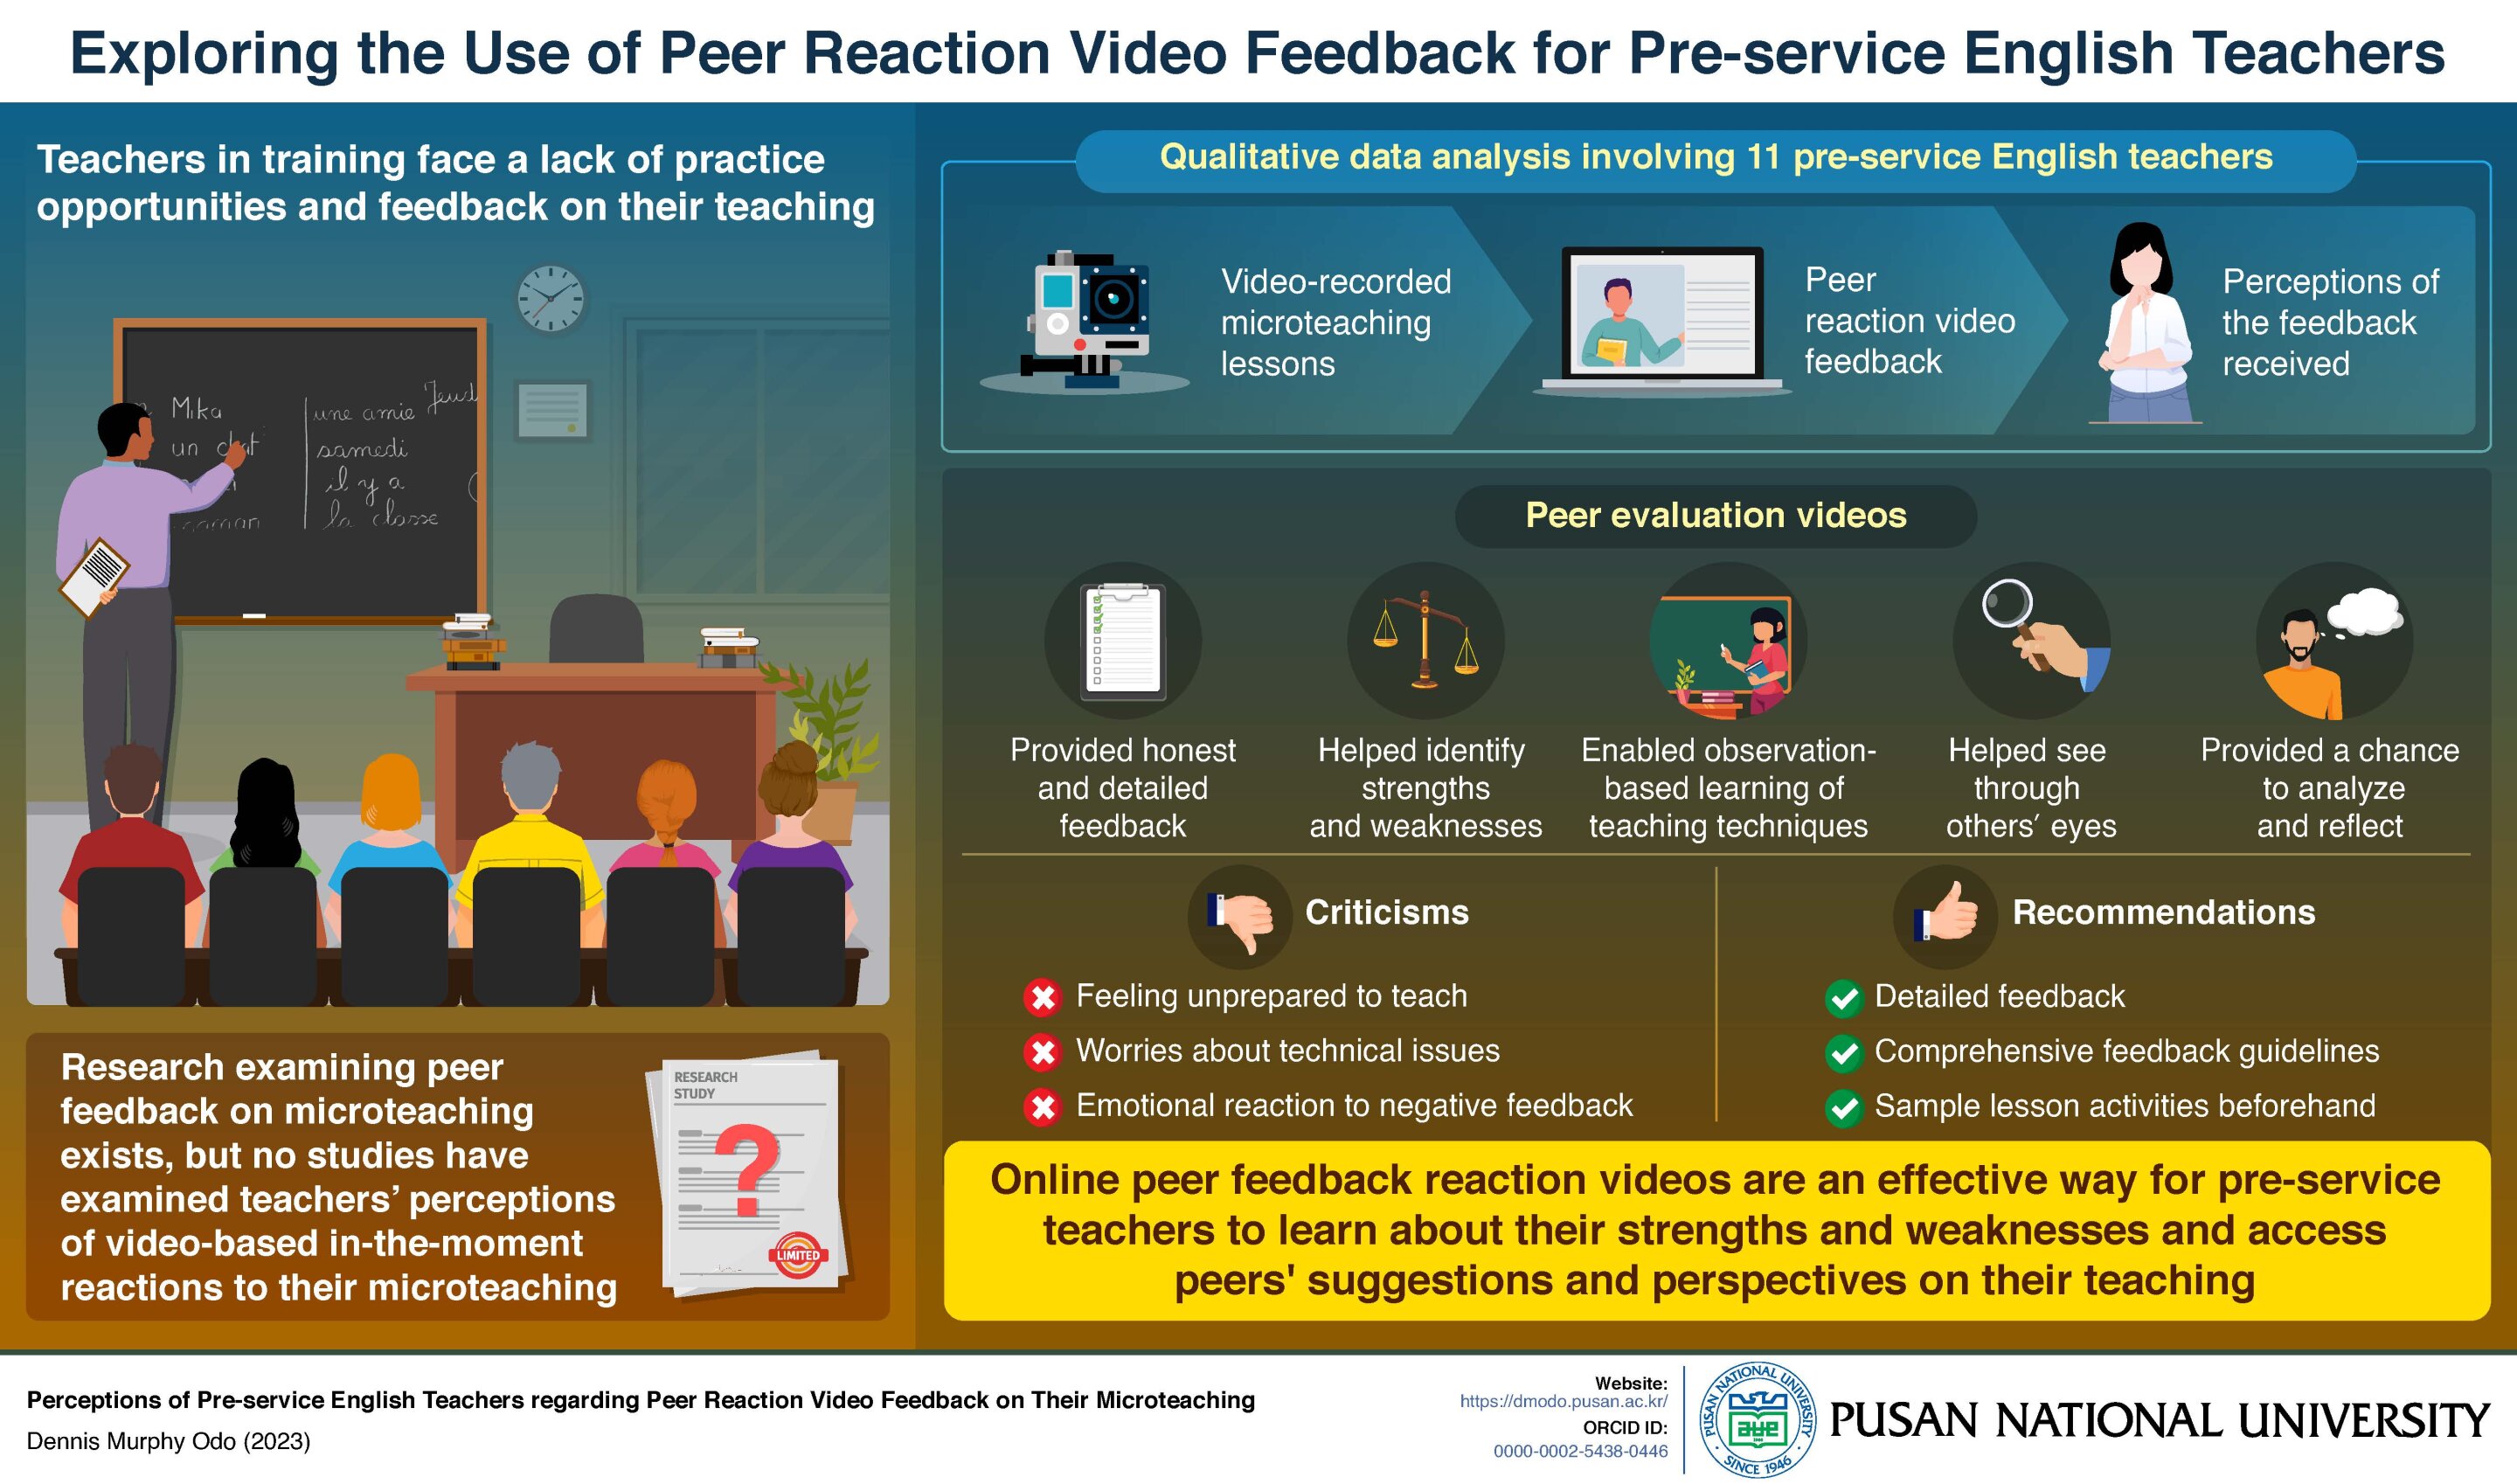 Study examines the perceptions of pre-service teachers on peer reaction video feedback